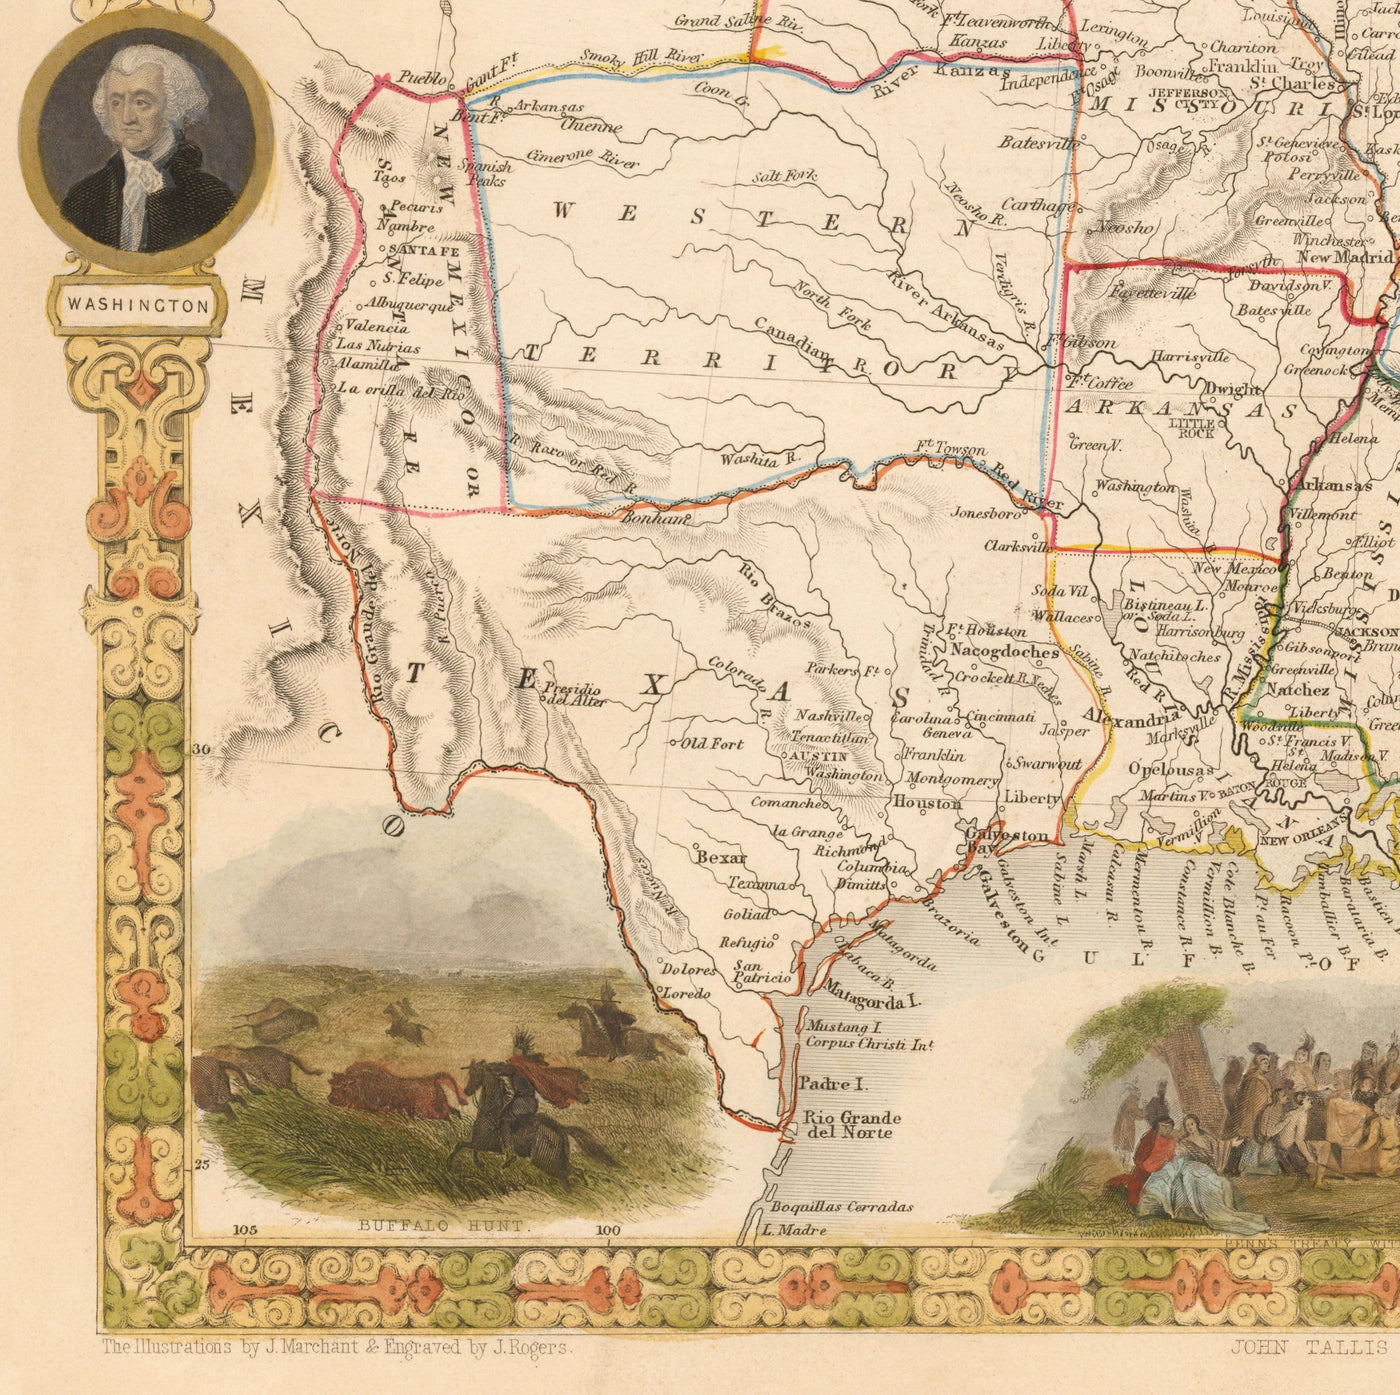 Old Map of the USA, 1851 by Tallis & Rapkin - Large Texas, Western and Missouri Territory, Odd Borders